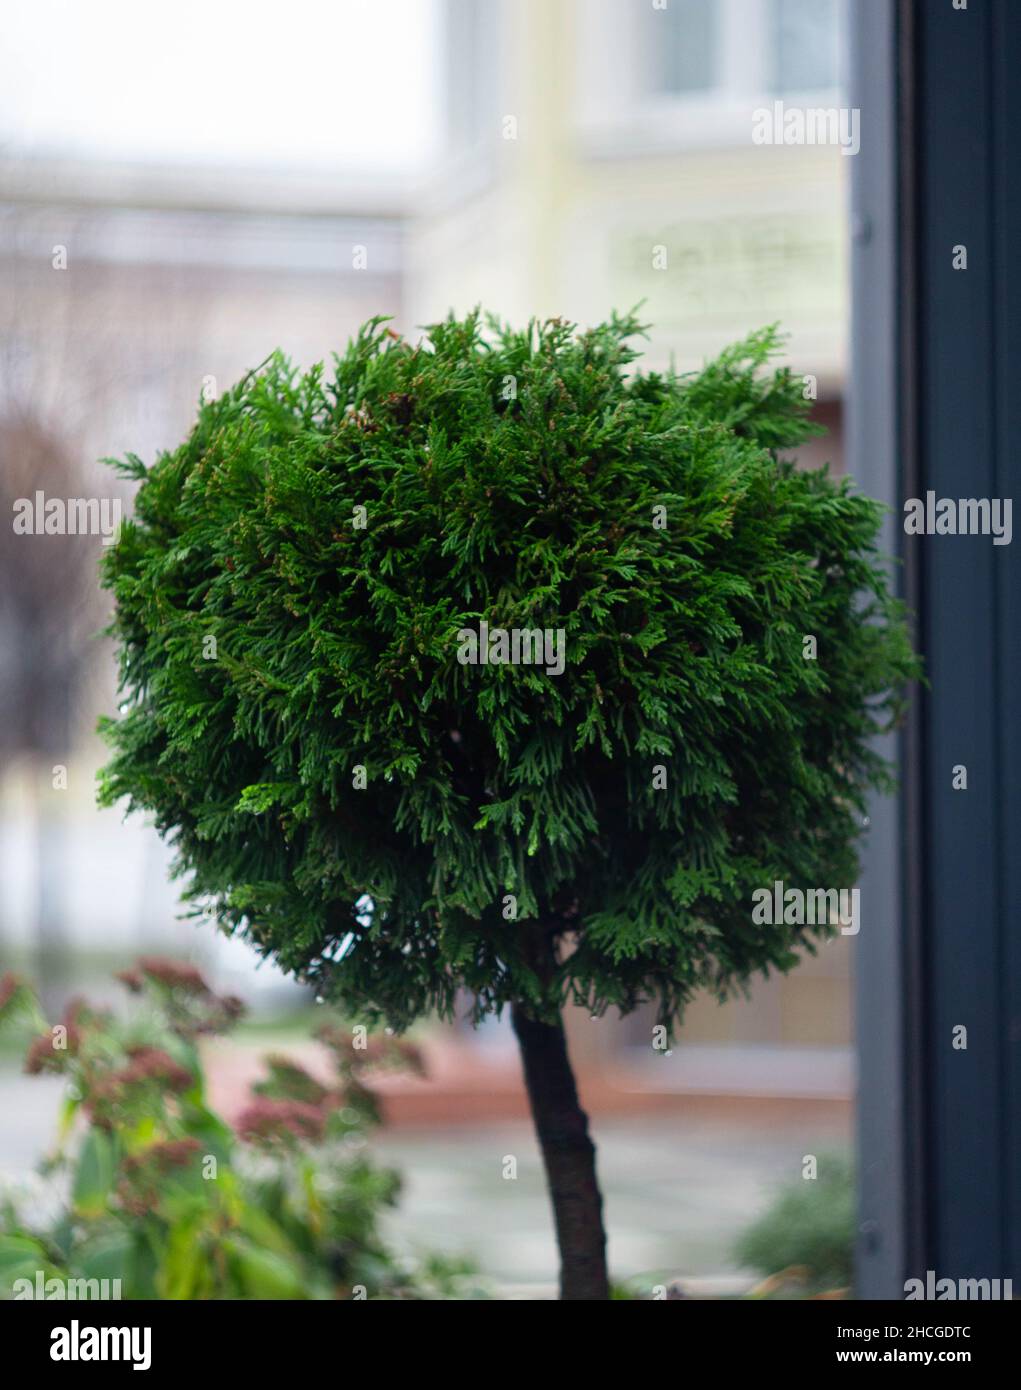 Vertical shot of a round tuja tree with blurred background Stock Photo